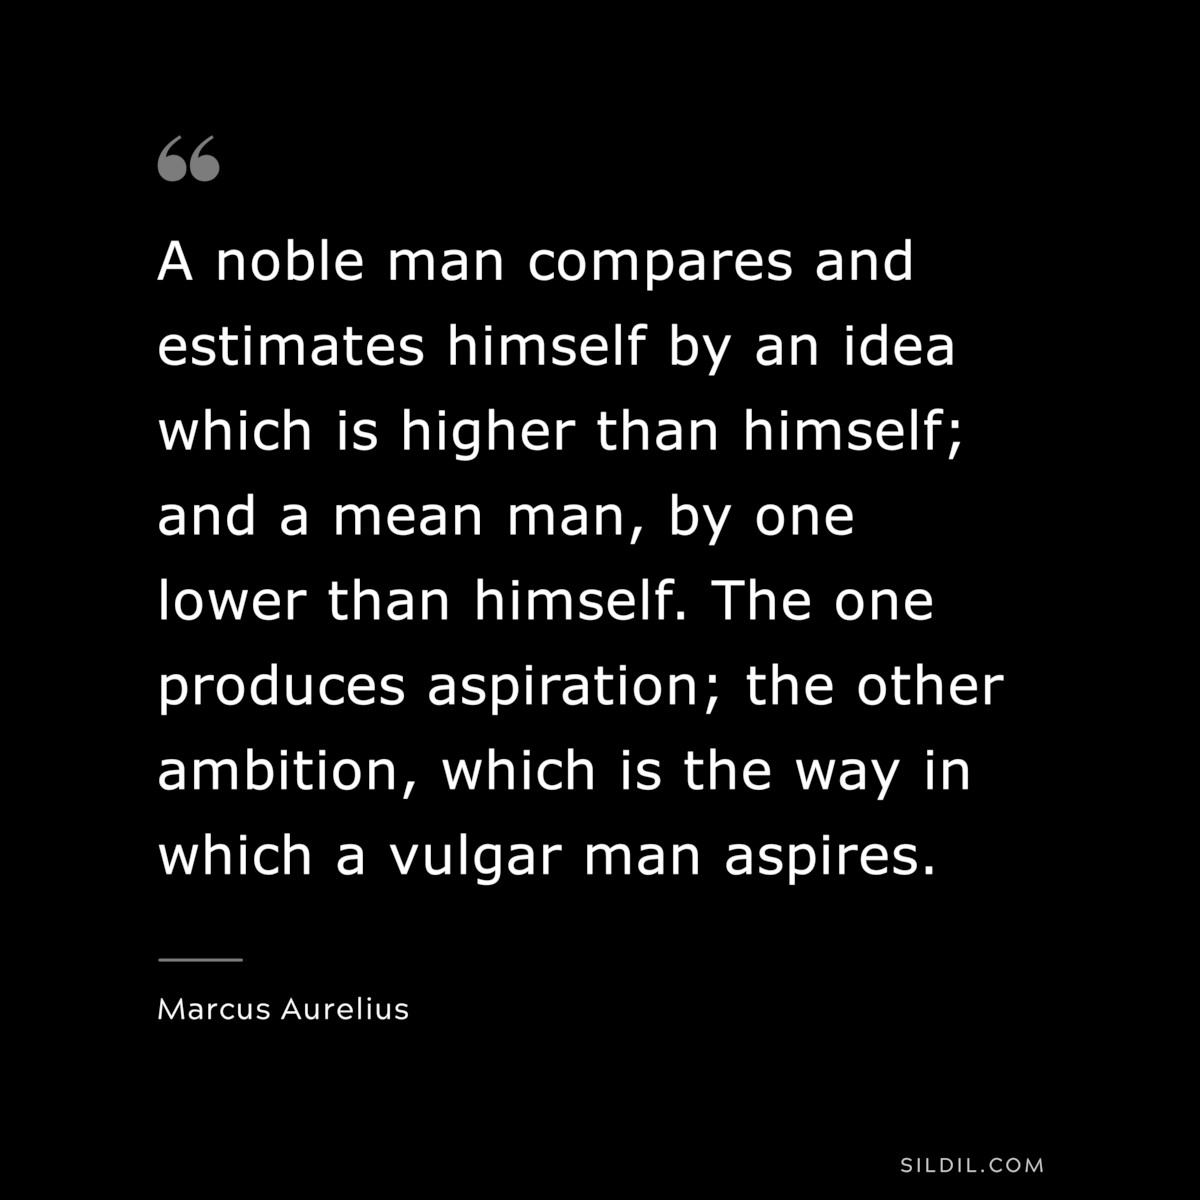 A noble man compares and estimates himself by an idea which is higher than himself; and a mean man, by one lower than himself. The one produces aspiration; the other ambition, which is the way in which a vulgar man aspires. ― Marcus Aurelius